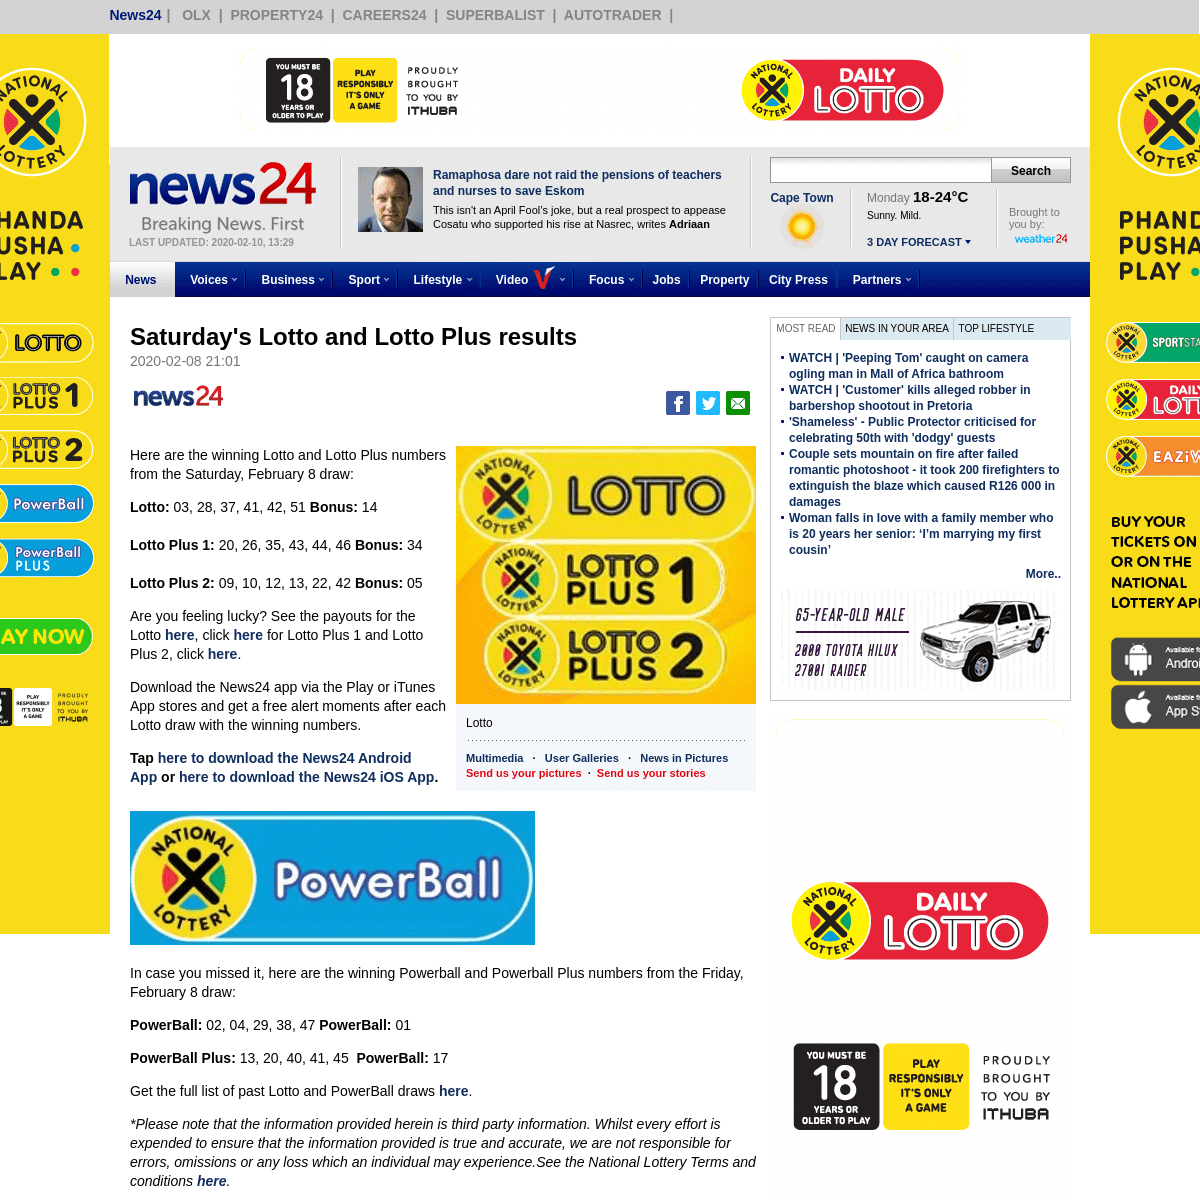 A complete backup of www.news24.com/Lottery/saturdays-lotto-and-lotto-plus-results-20200208-6